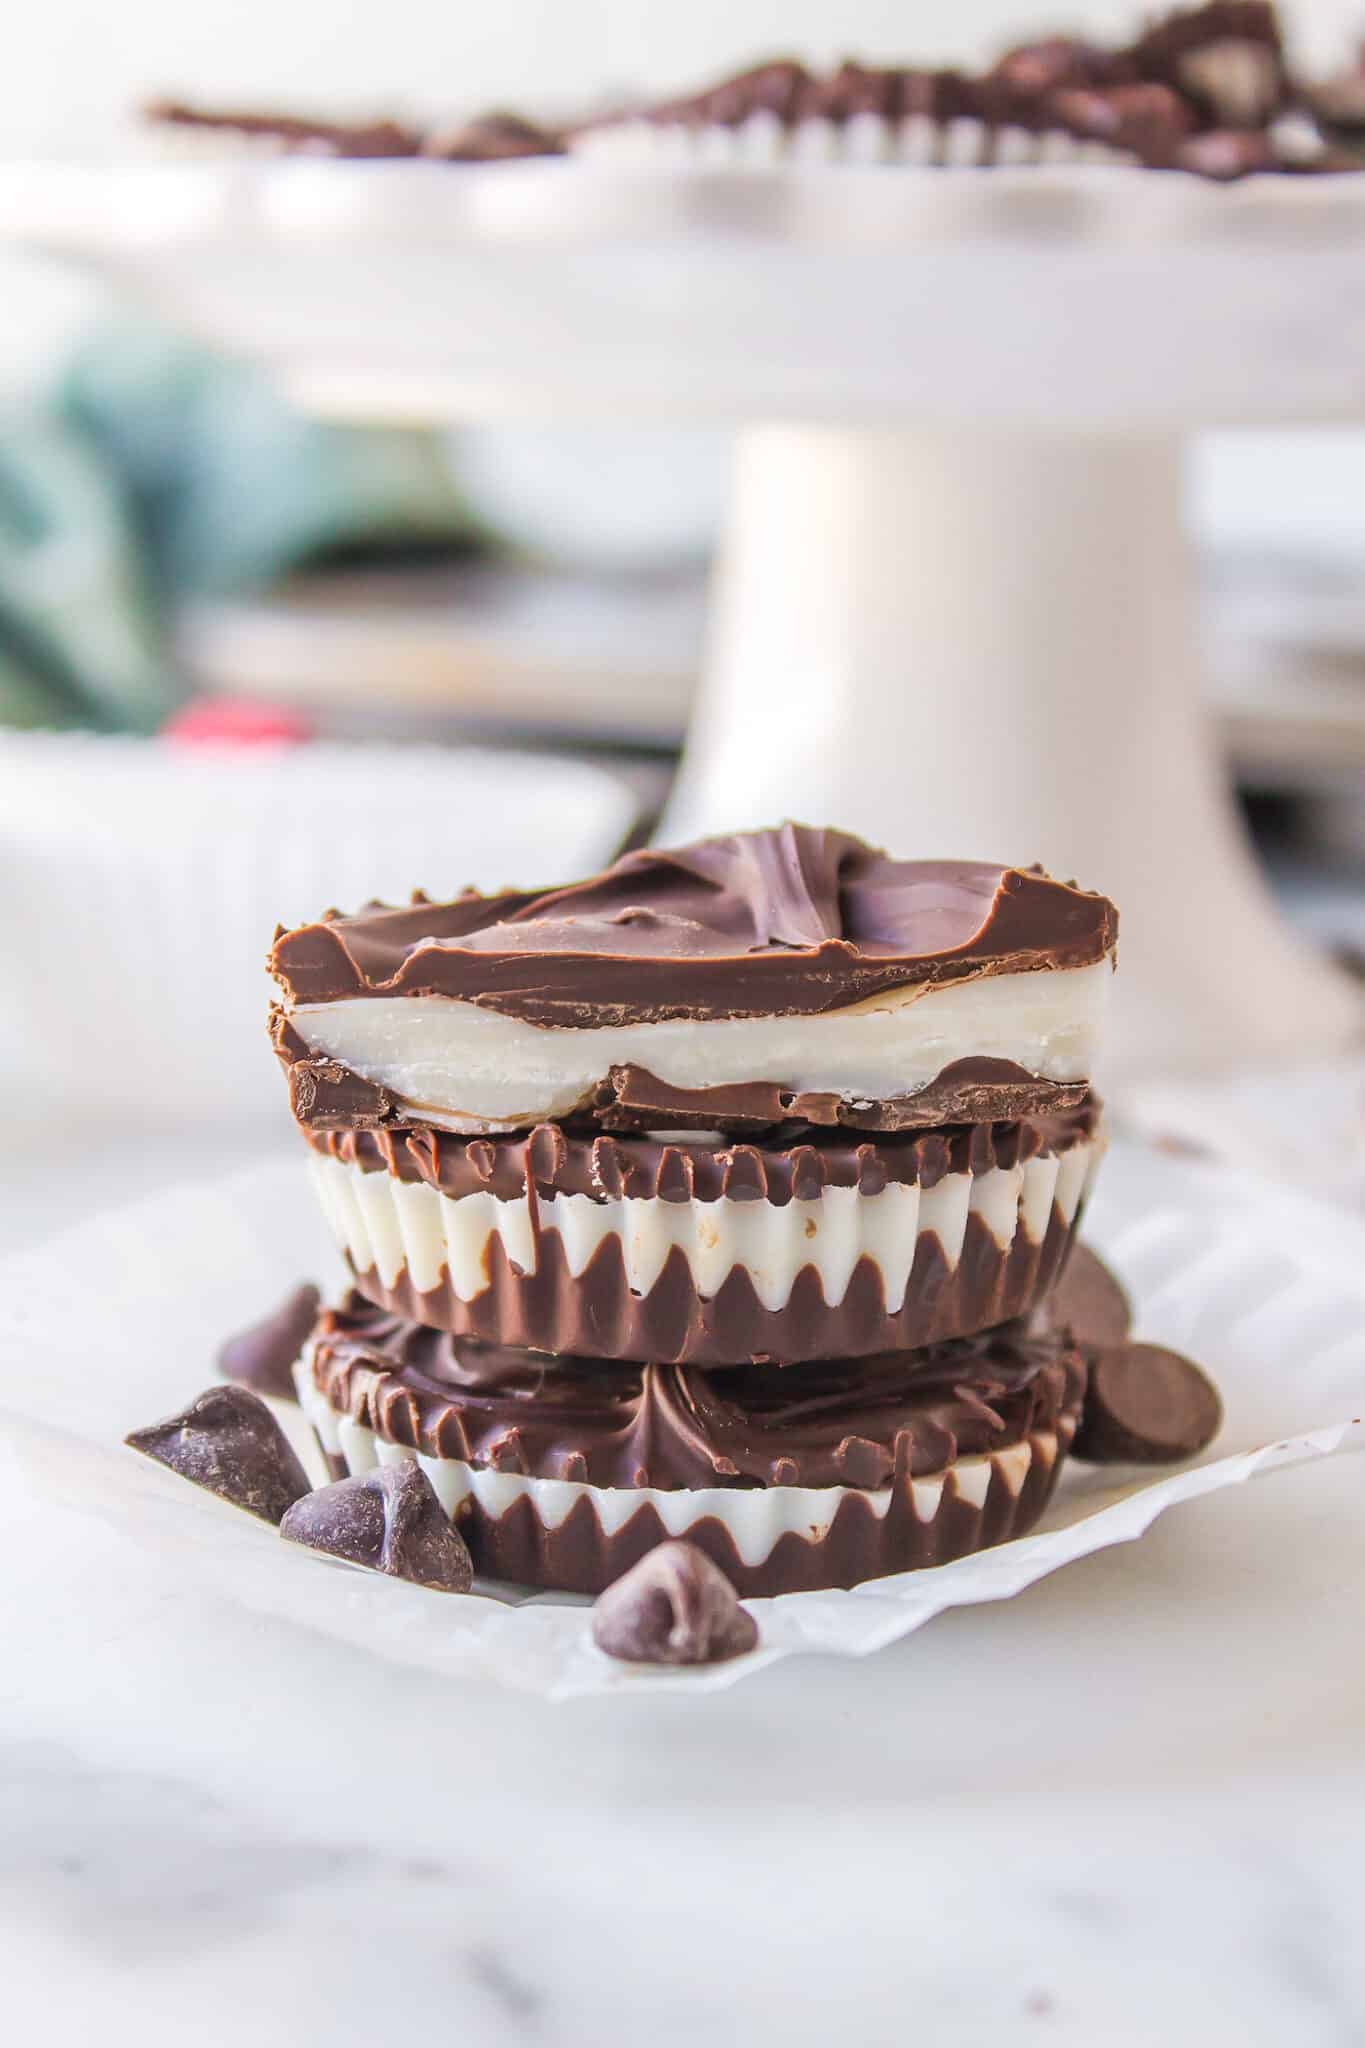 Three homemade peppermint patties stacked on a white plate.